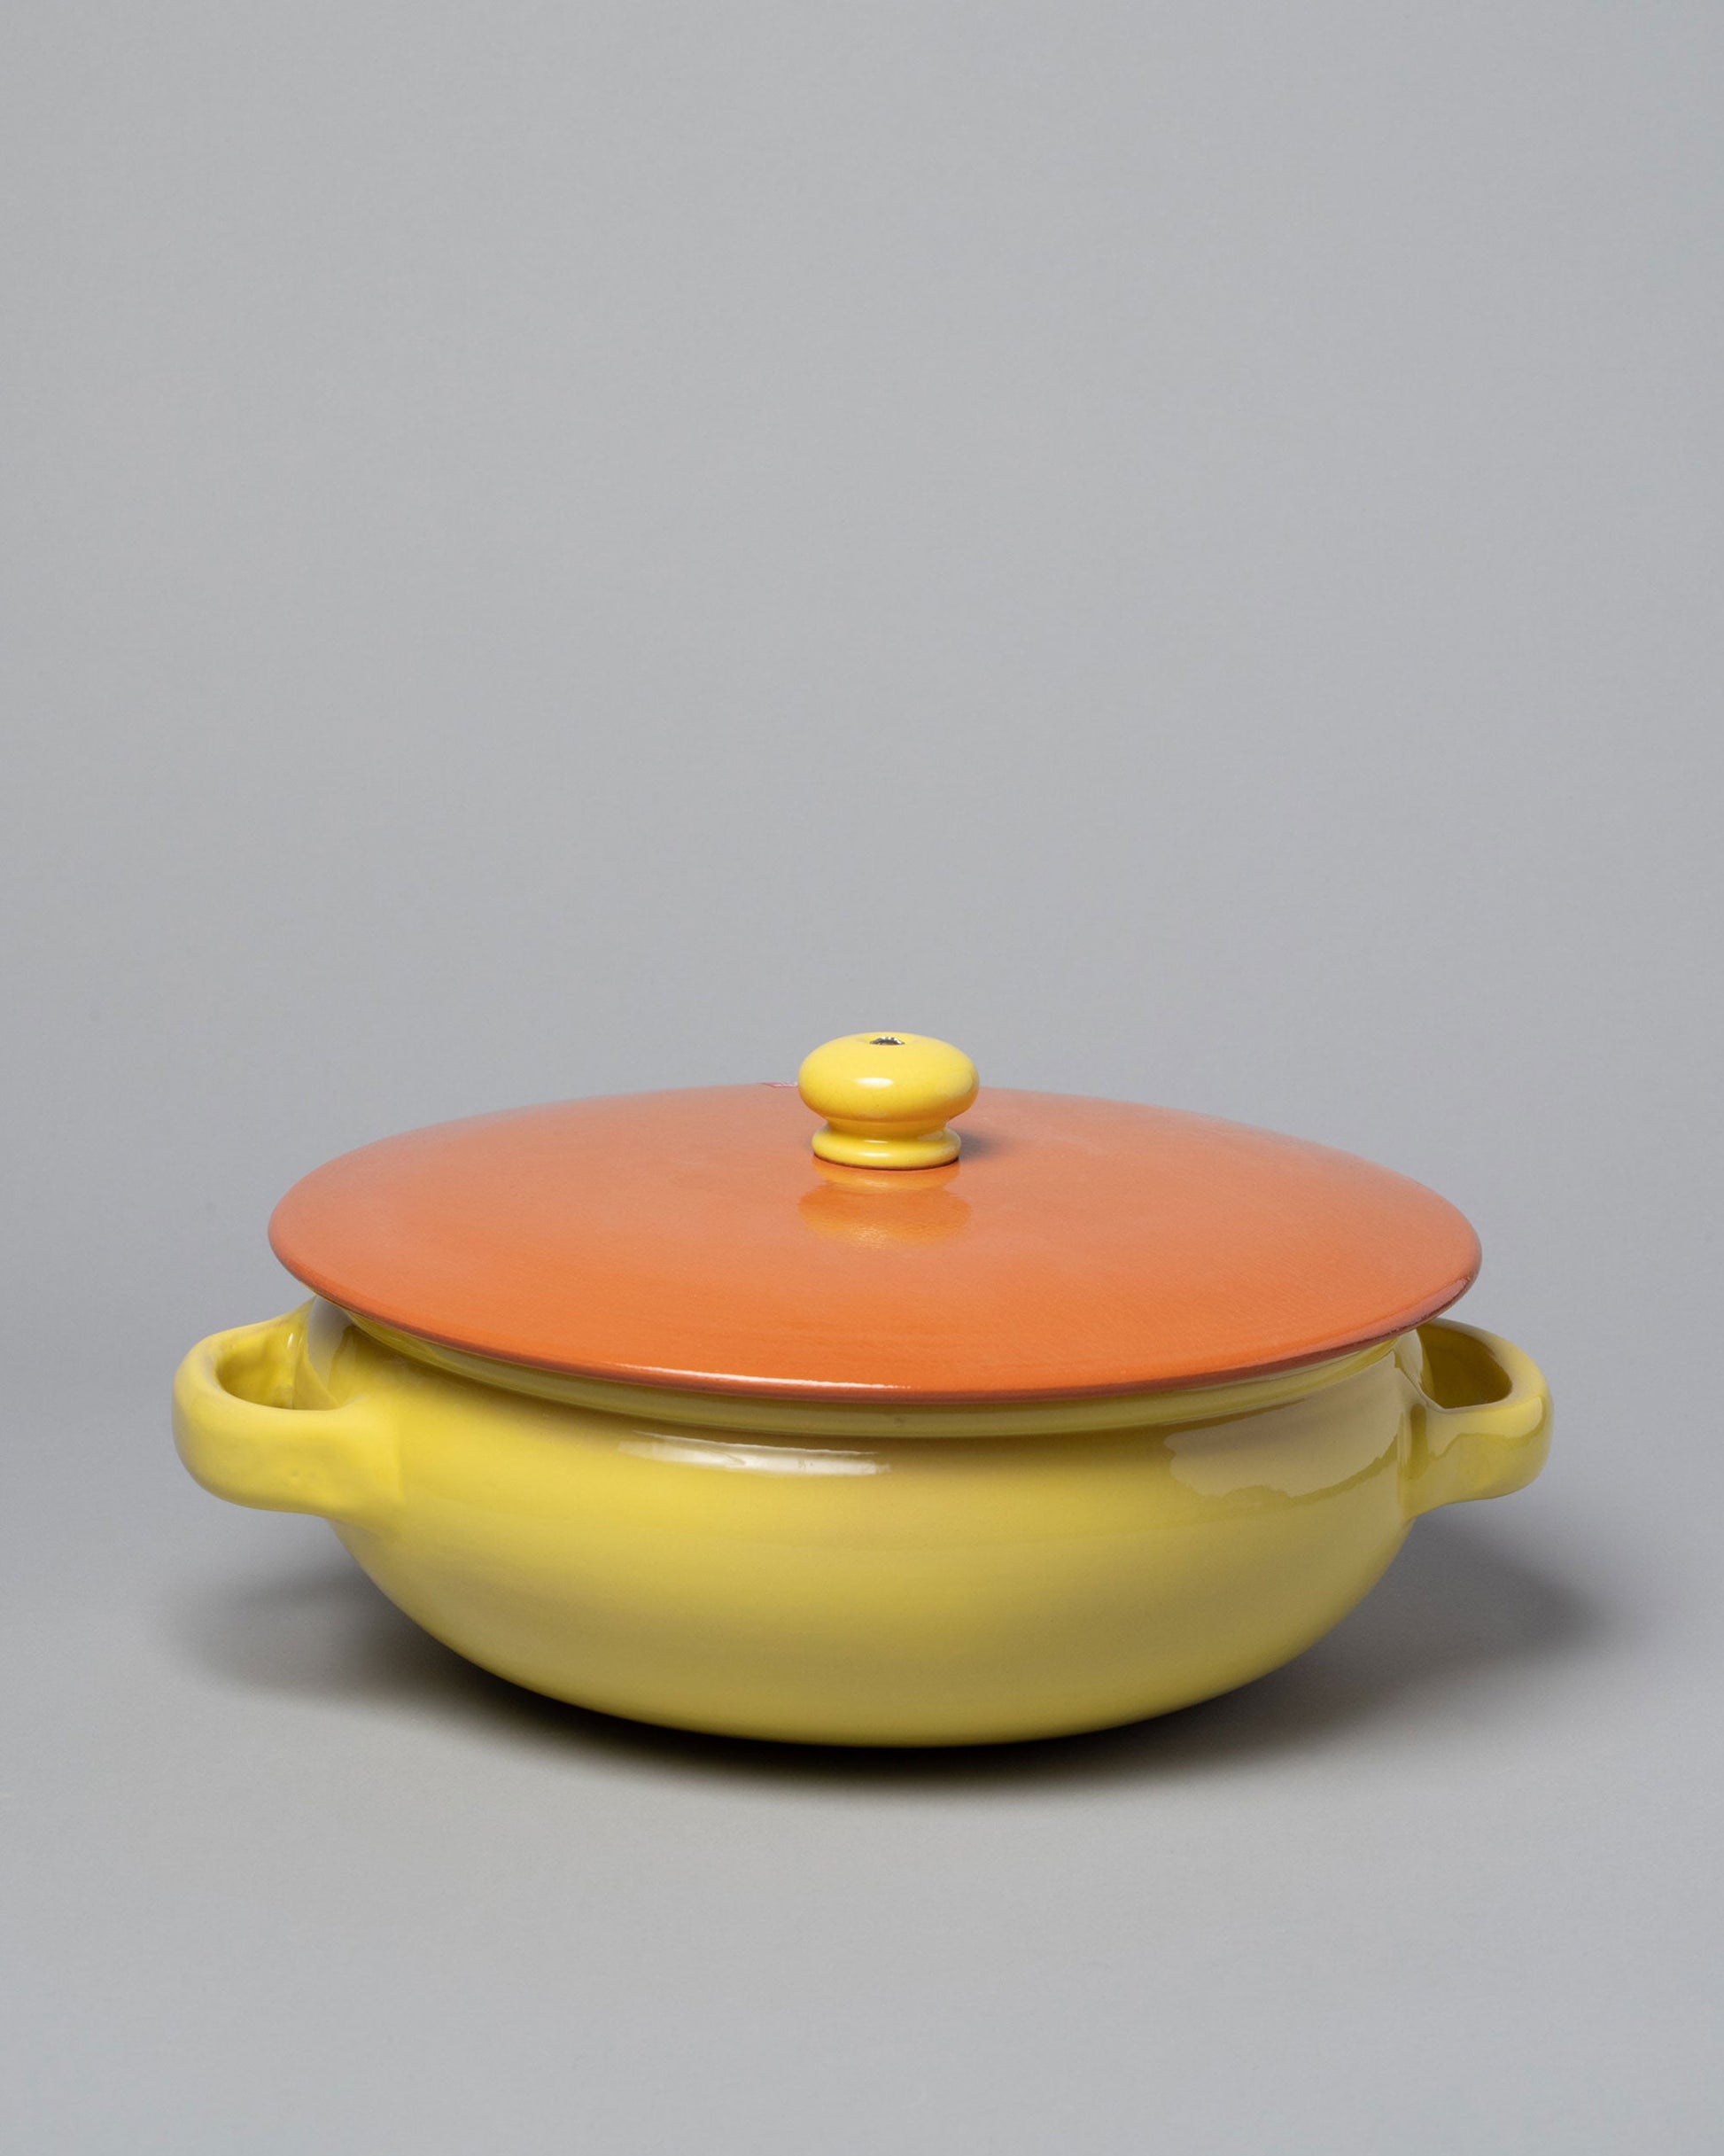  Mazzotti 1903 Large Yellow and Orange Clay Pot on light color background.